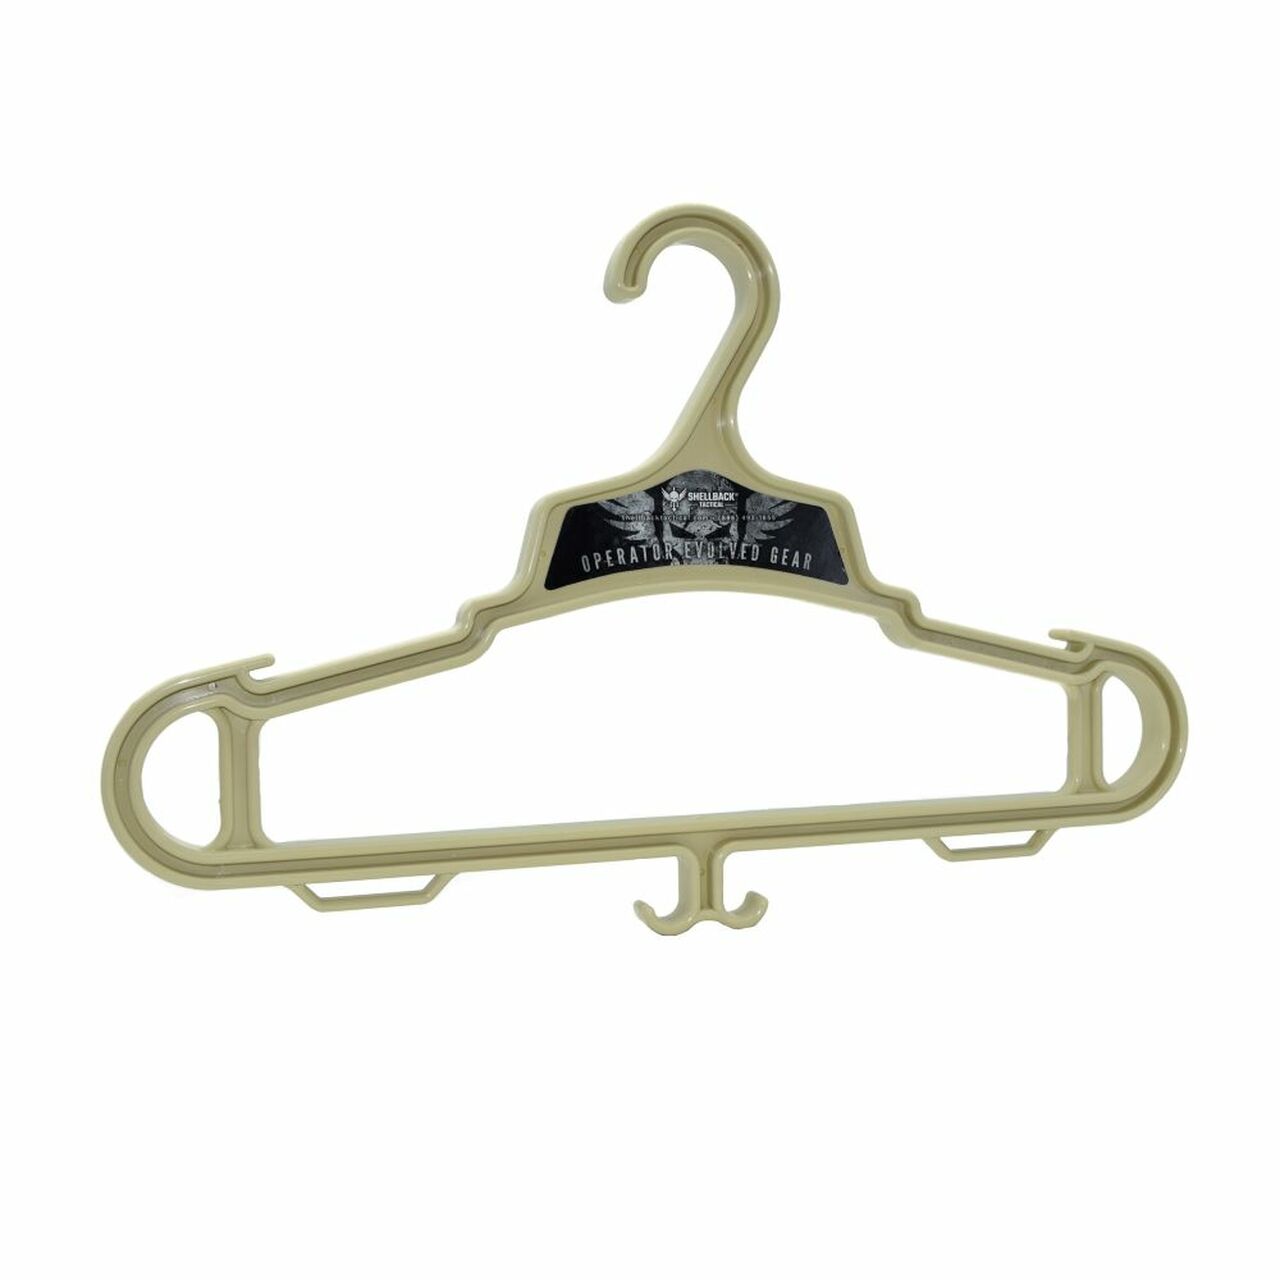 A Shellback Tactical Heavy Hanger with a skull on it.